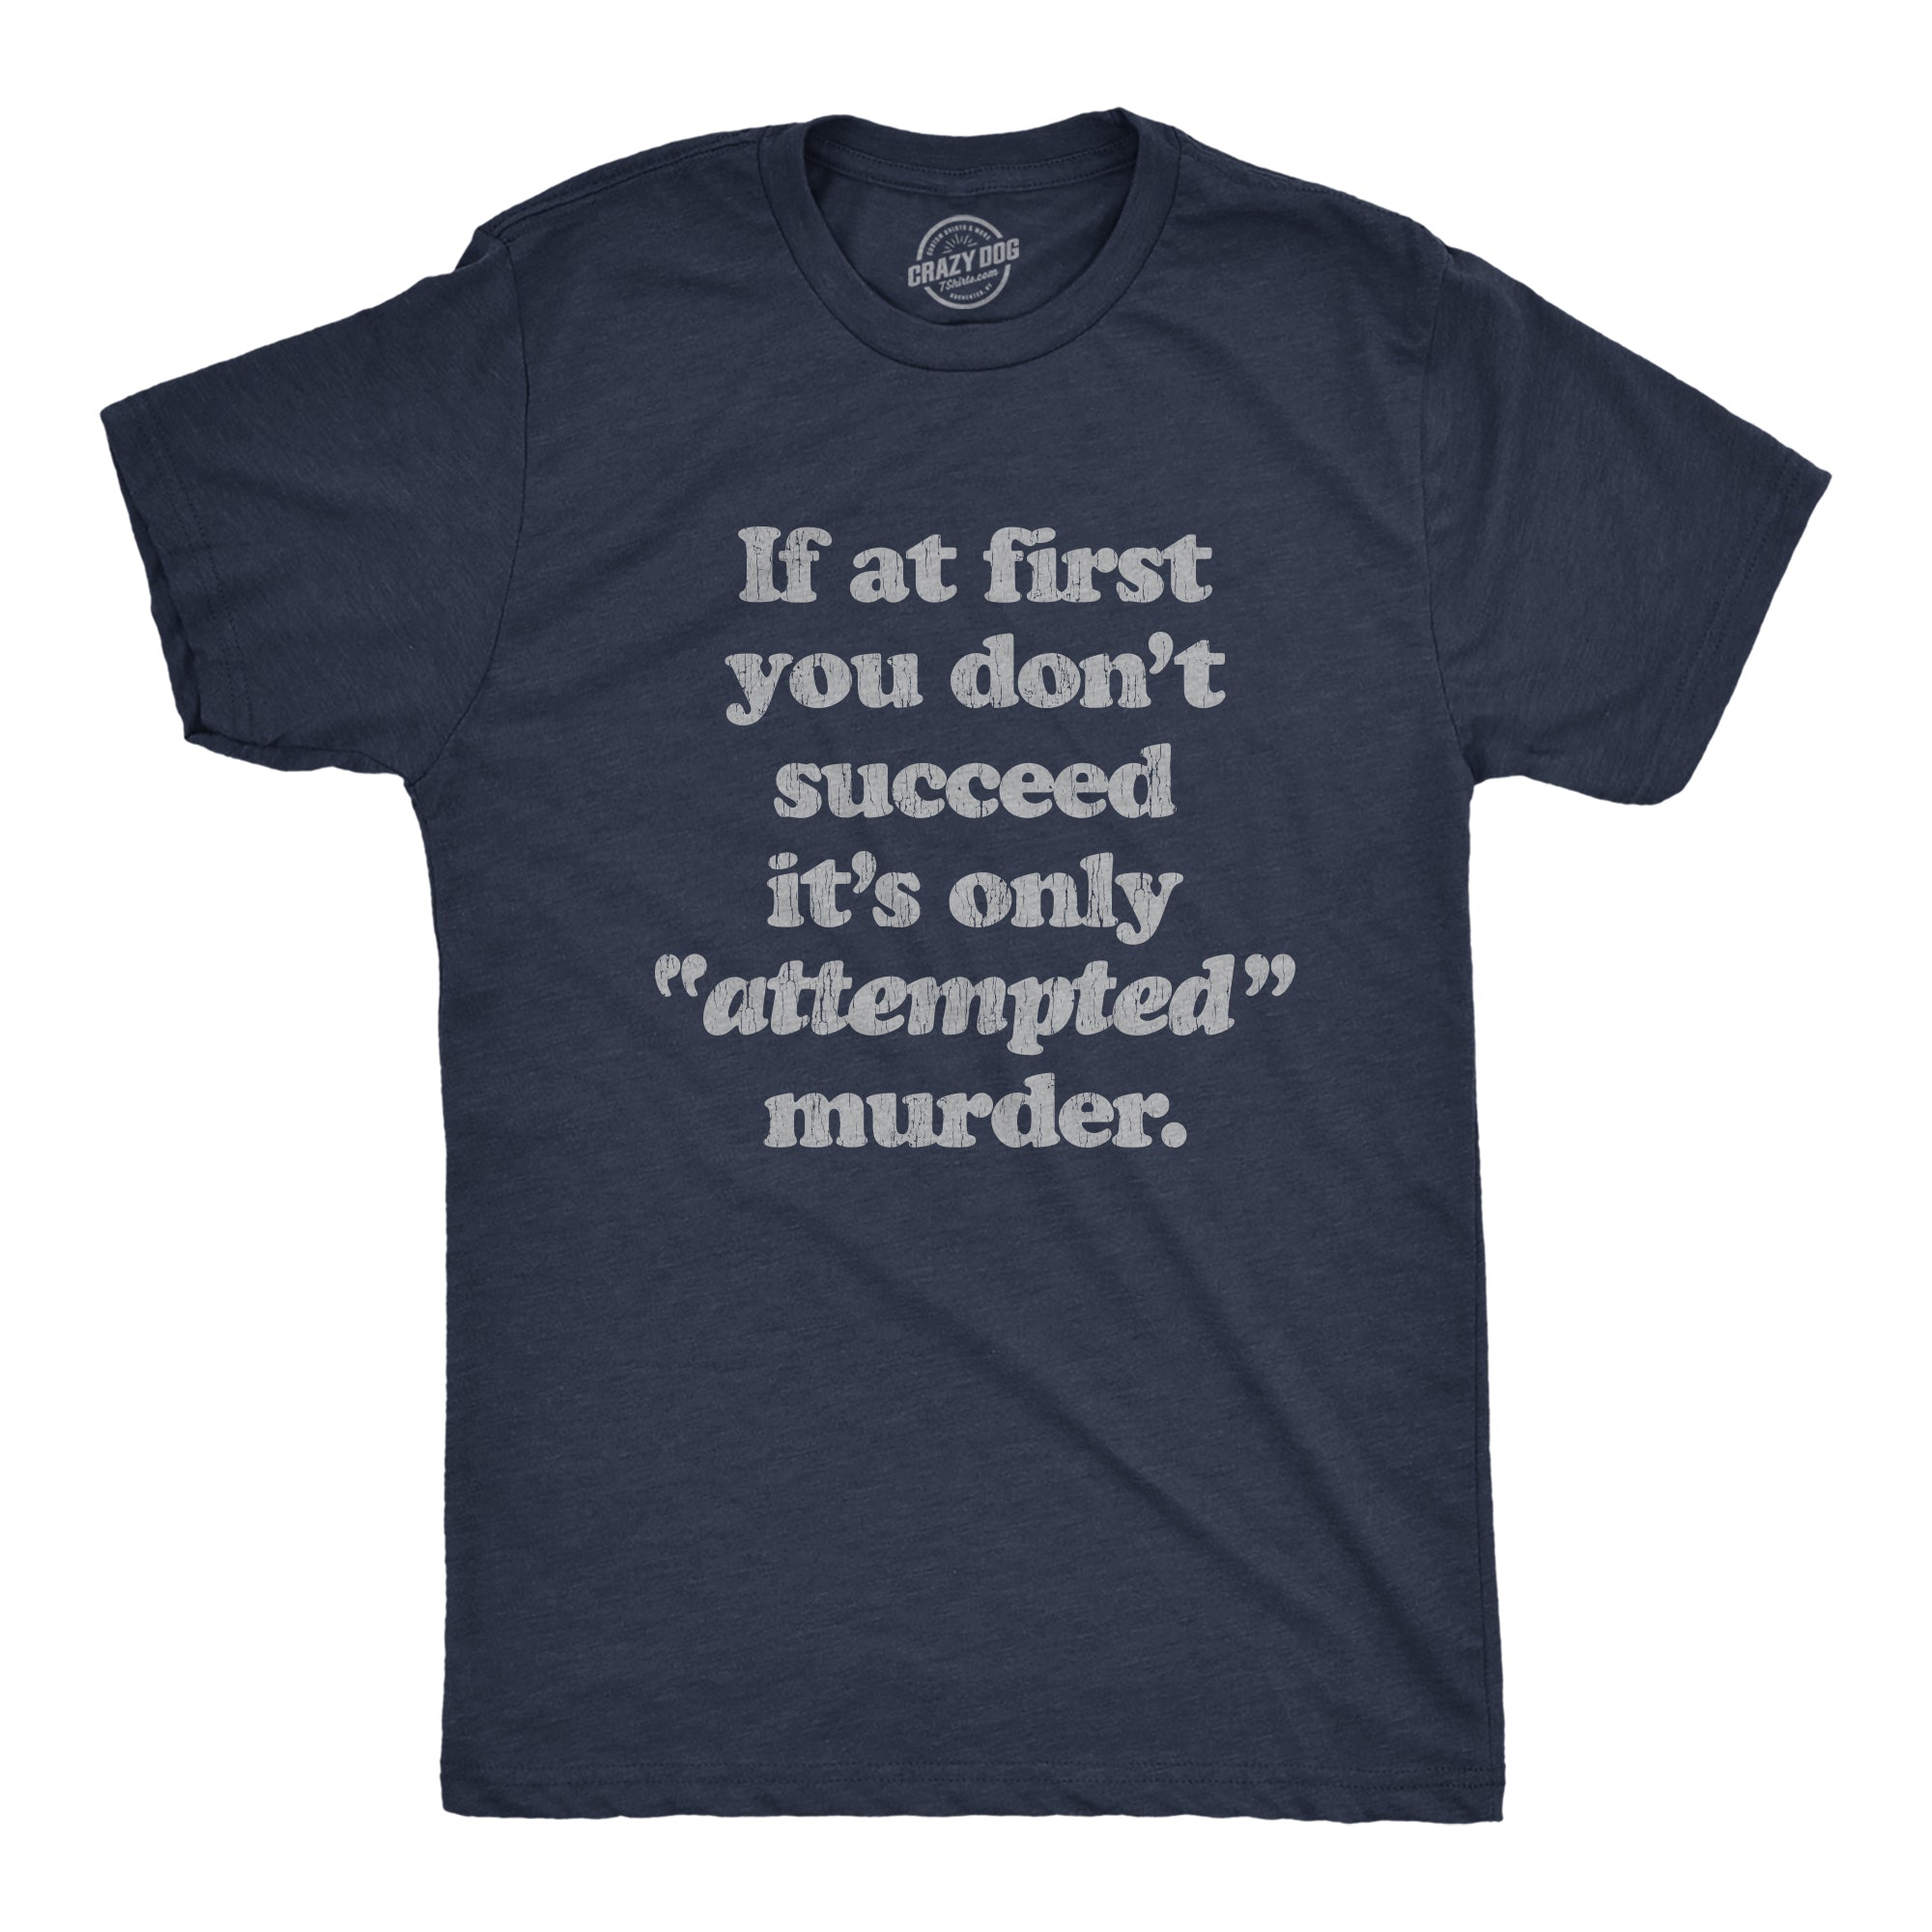 Funny Heather Navy If At First You Don't Succeed It's Only Attempted Murder Mens T Shirt Nerdy Sarcastic Tee